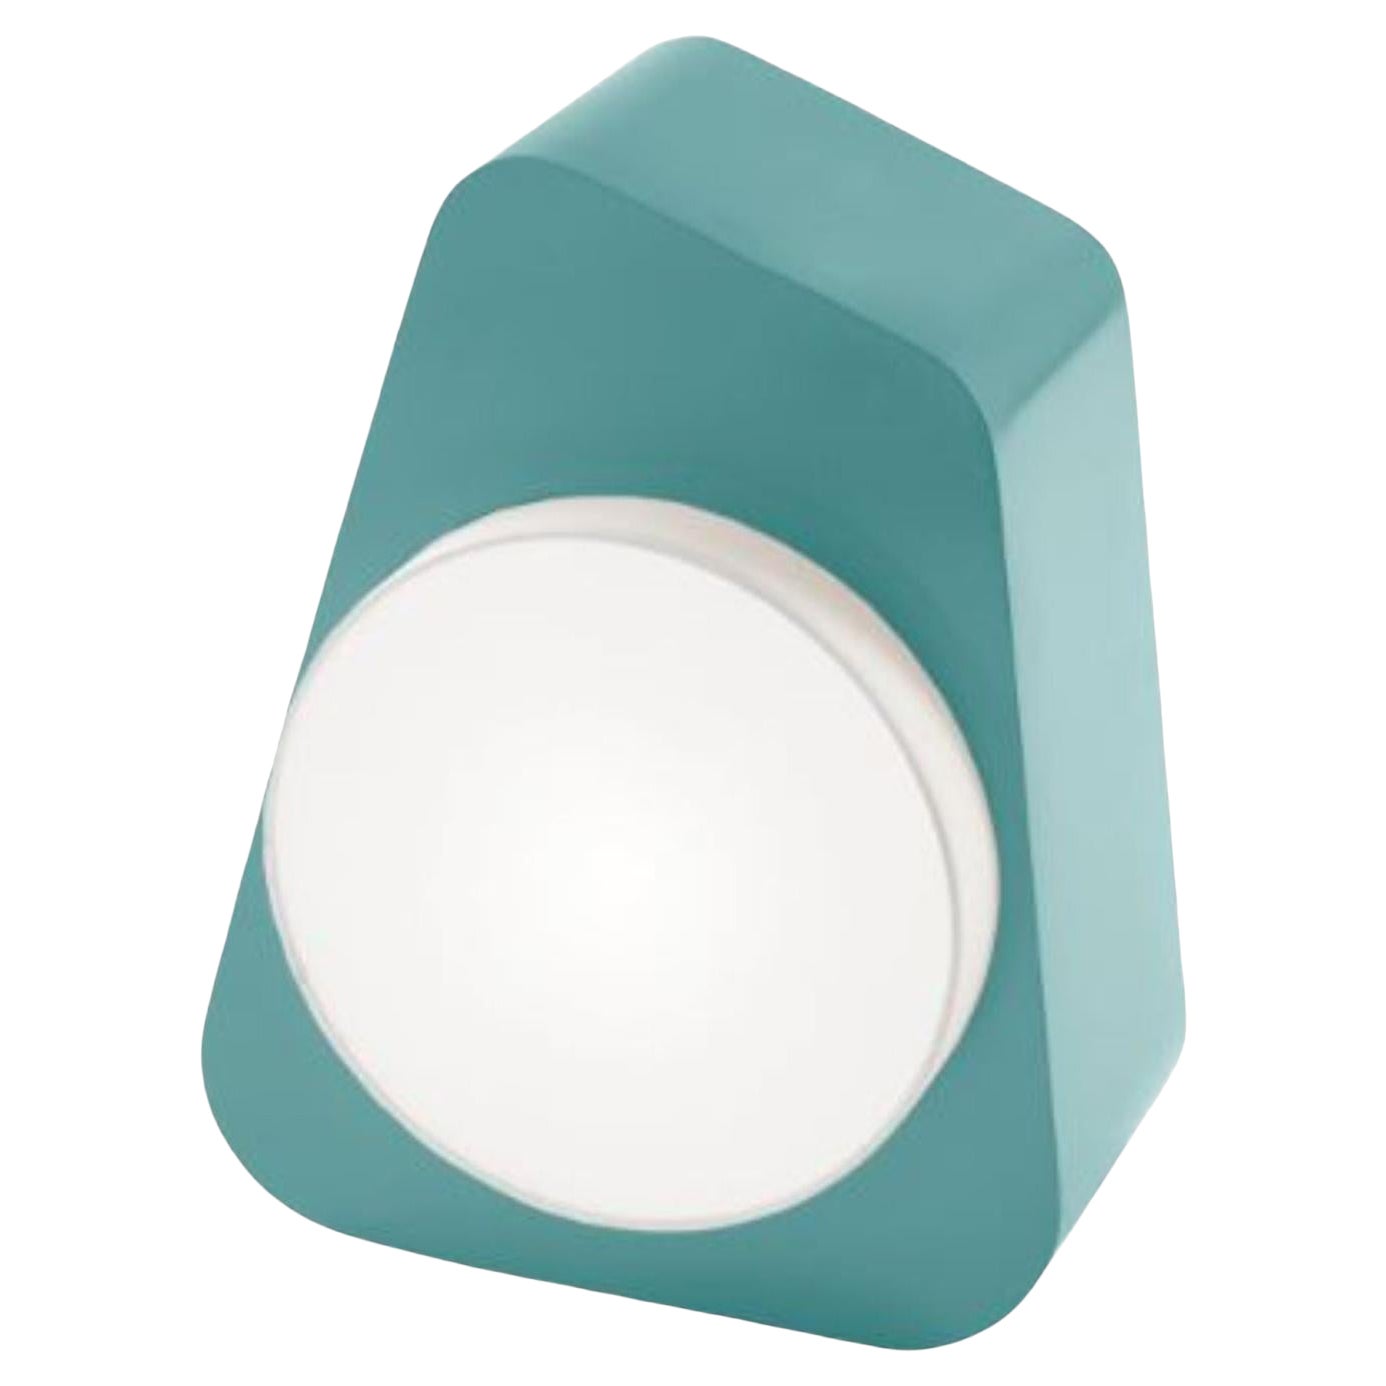 Mint Carousel Wall Lamp by Dooq For Sale